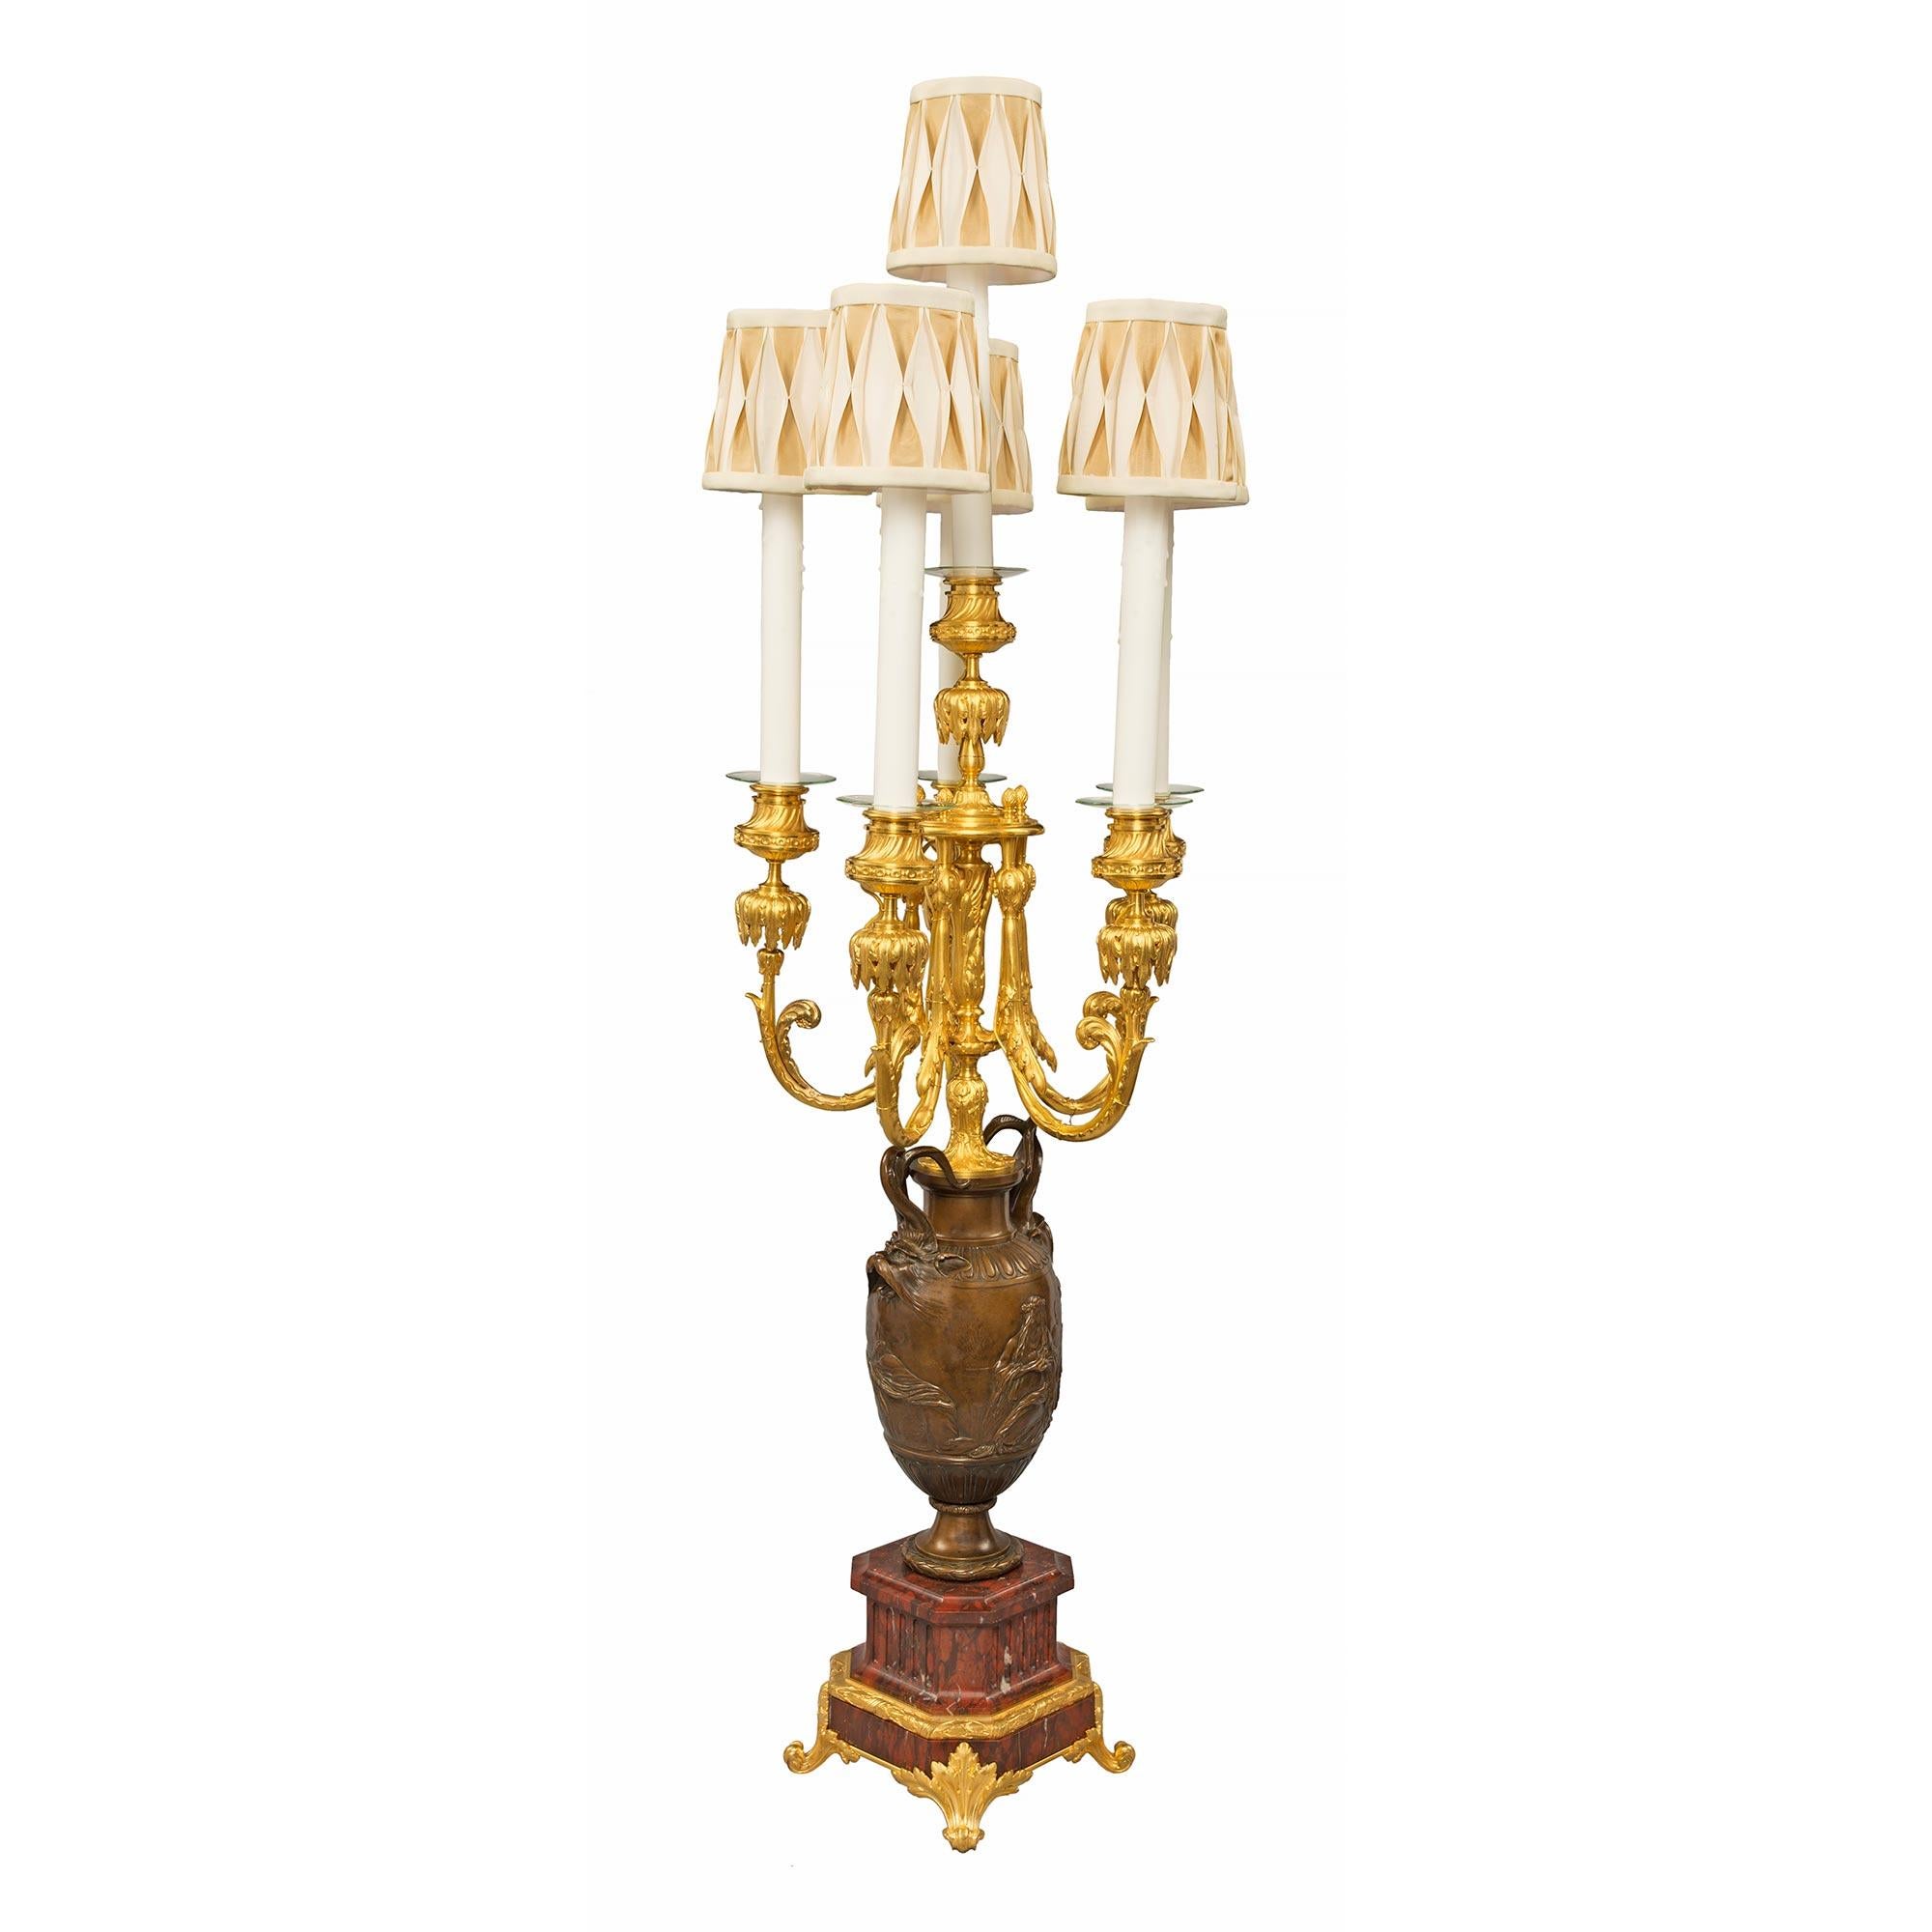 A stunning pair of French 19th century Renaissance st. patinated bronze, ormolu and Rouge Griotte marble candelabra lamps, signed Barbedienne. Each lamp is raised by a beautiful octagonal shaped Rouge Griotte marble base with a lovely fluted design,